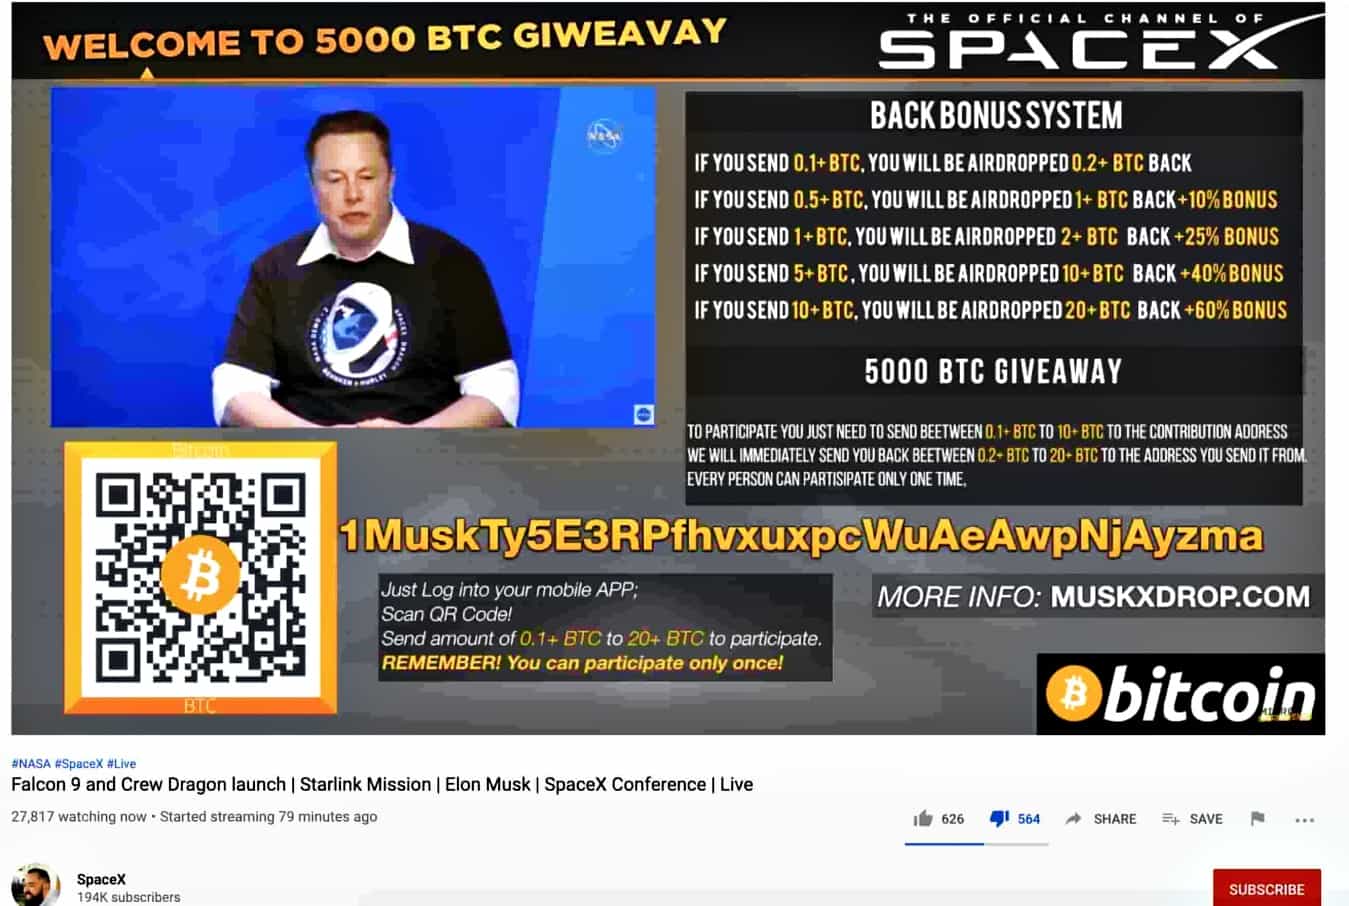 YouTube scammers impersonated Elon Musk, SpaceX; stole $150k in BTC